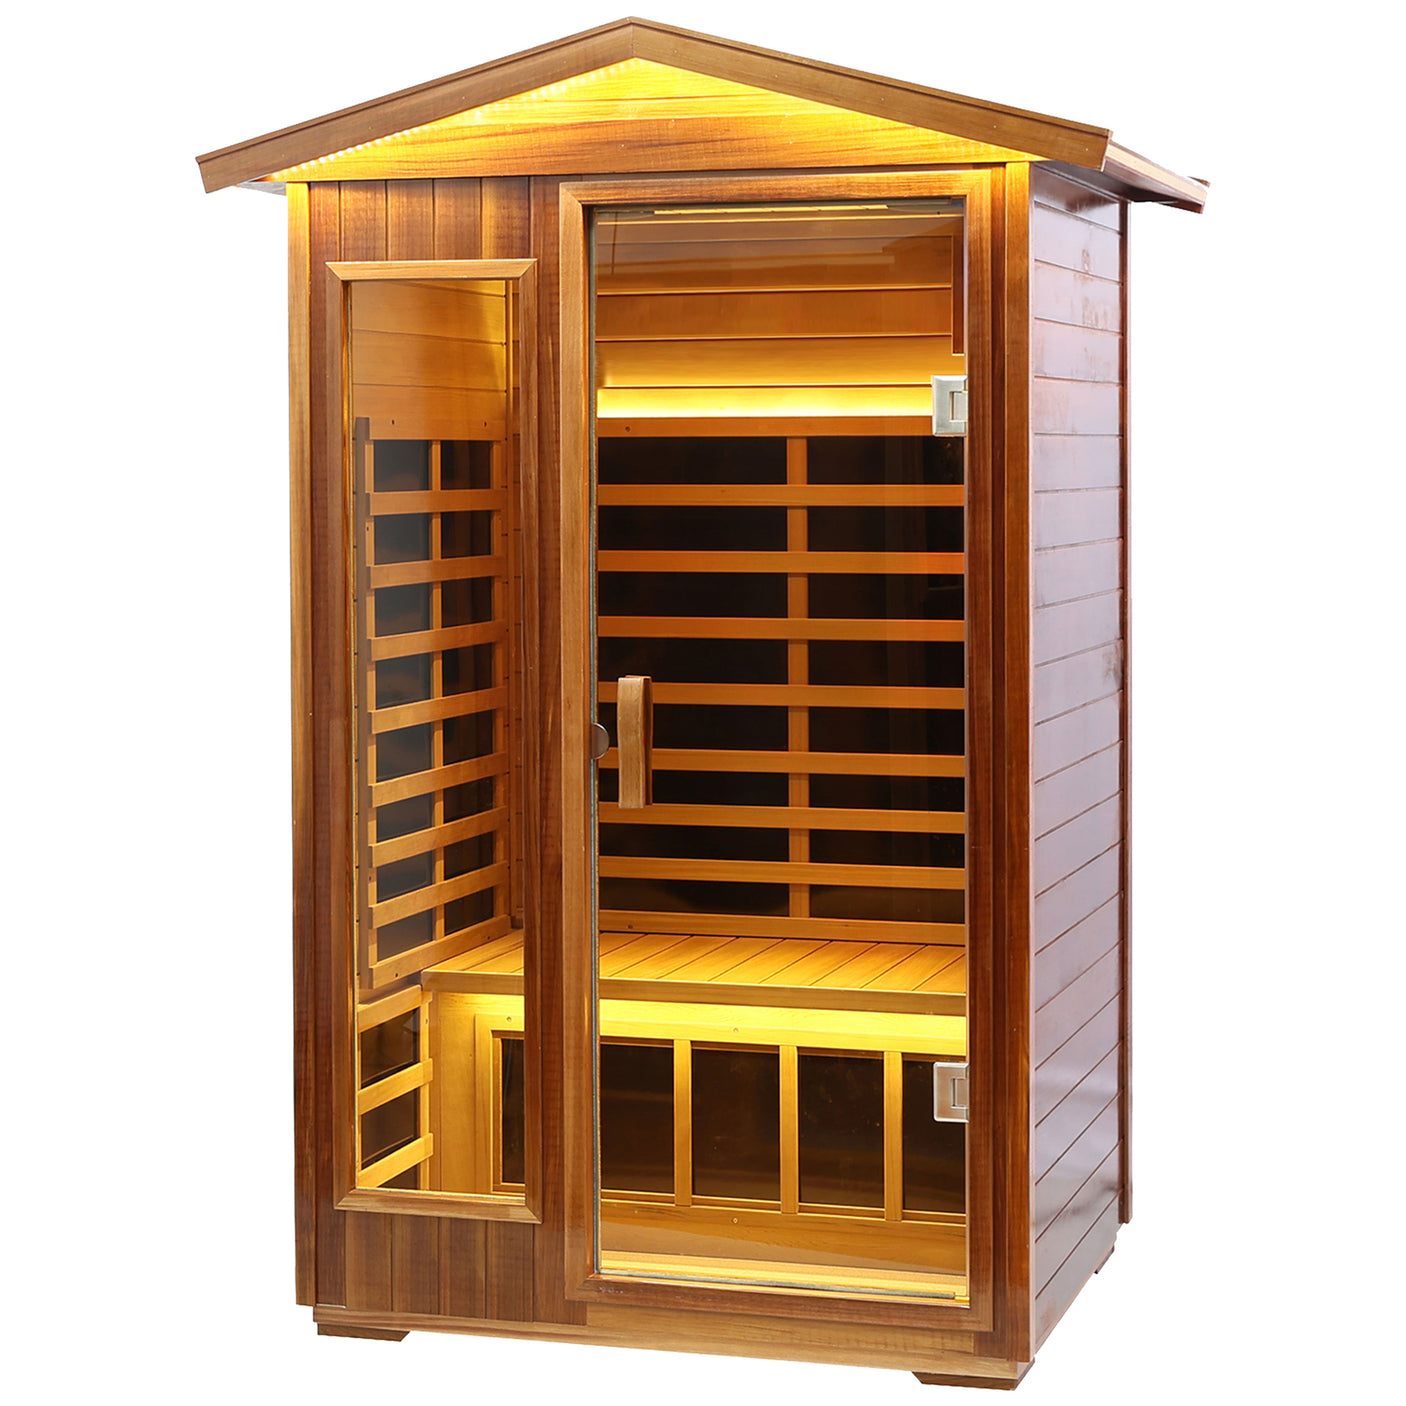 Two-person far-infrared outdoor sauna - Home Elegance USA